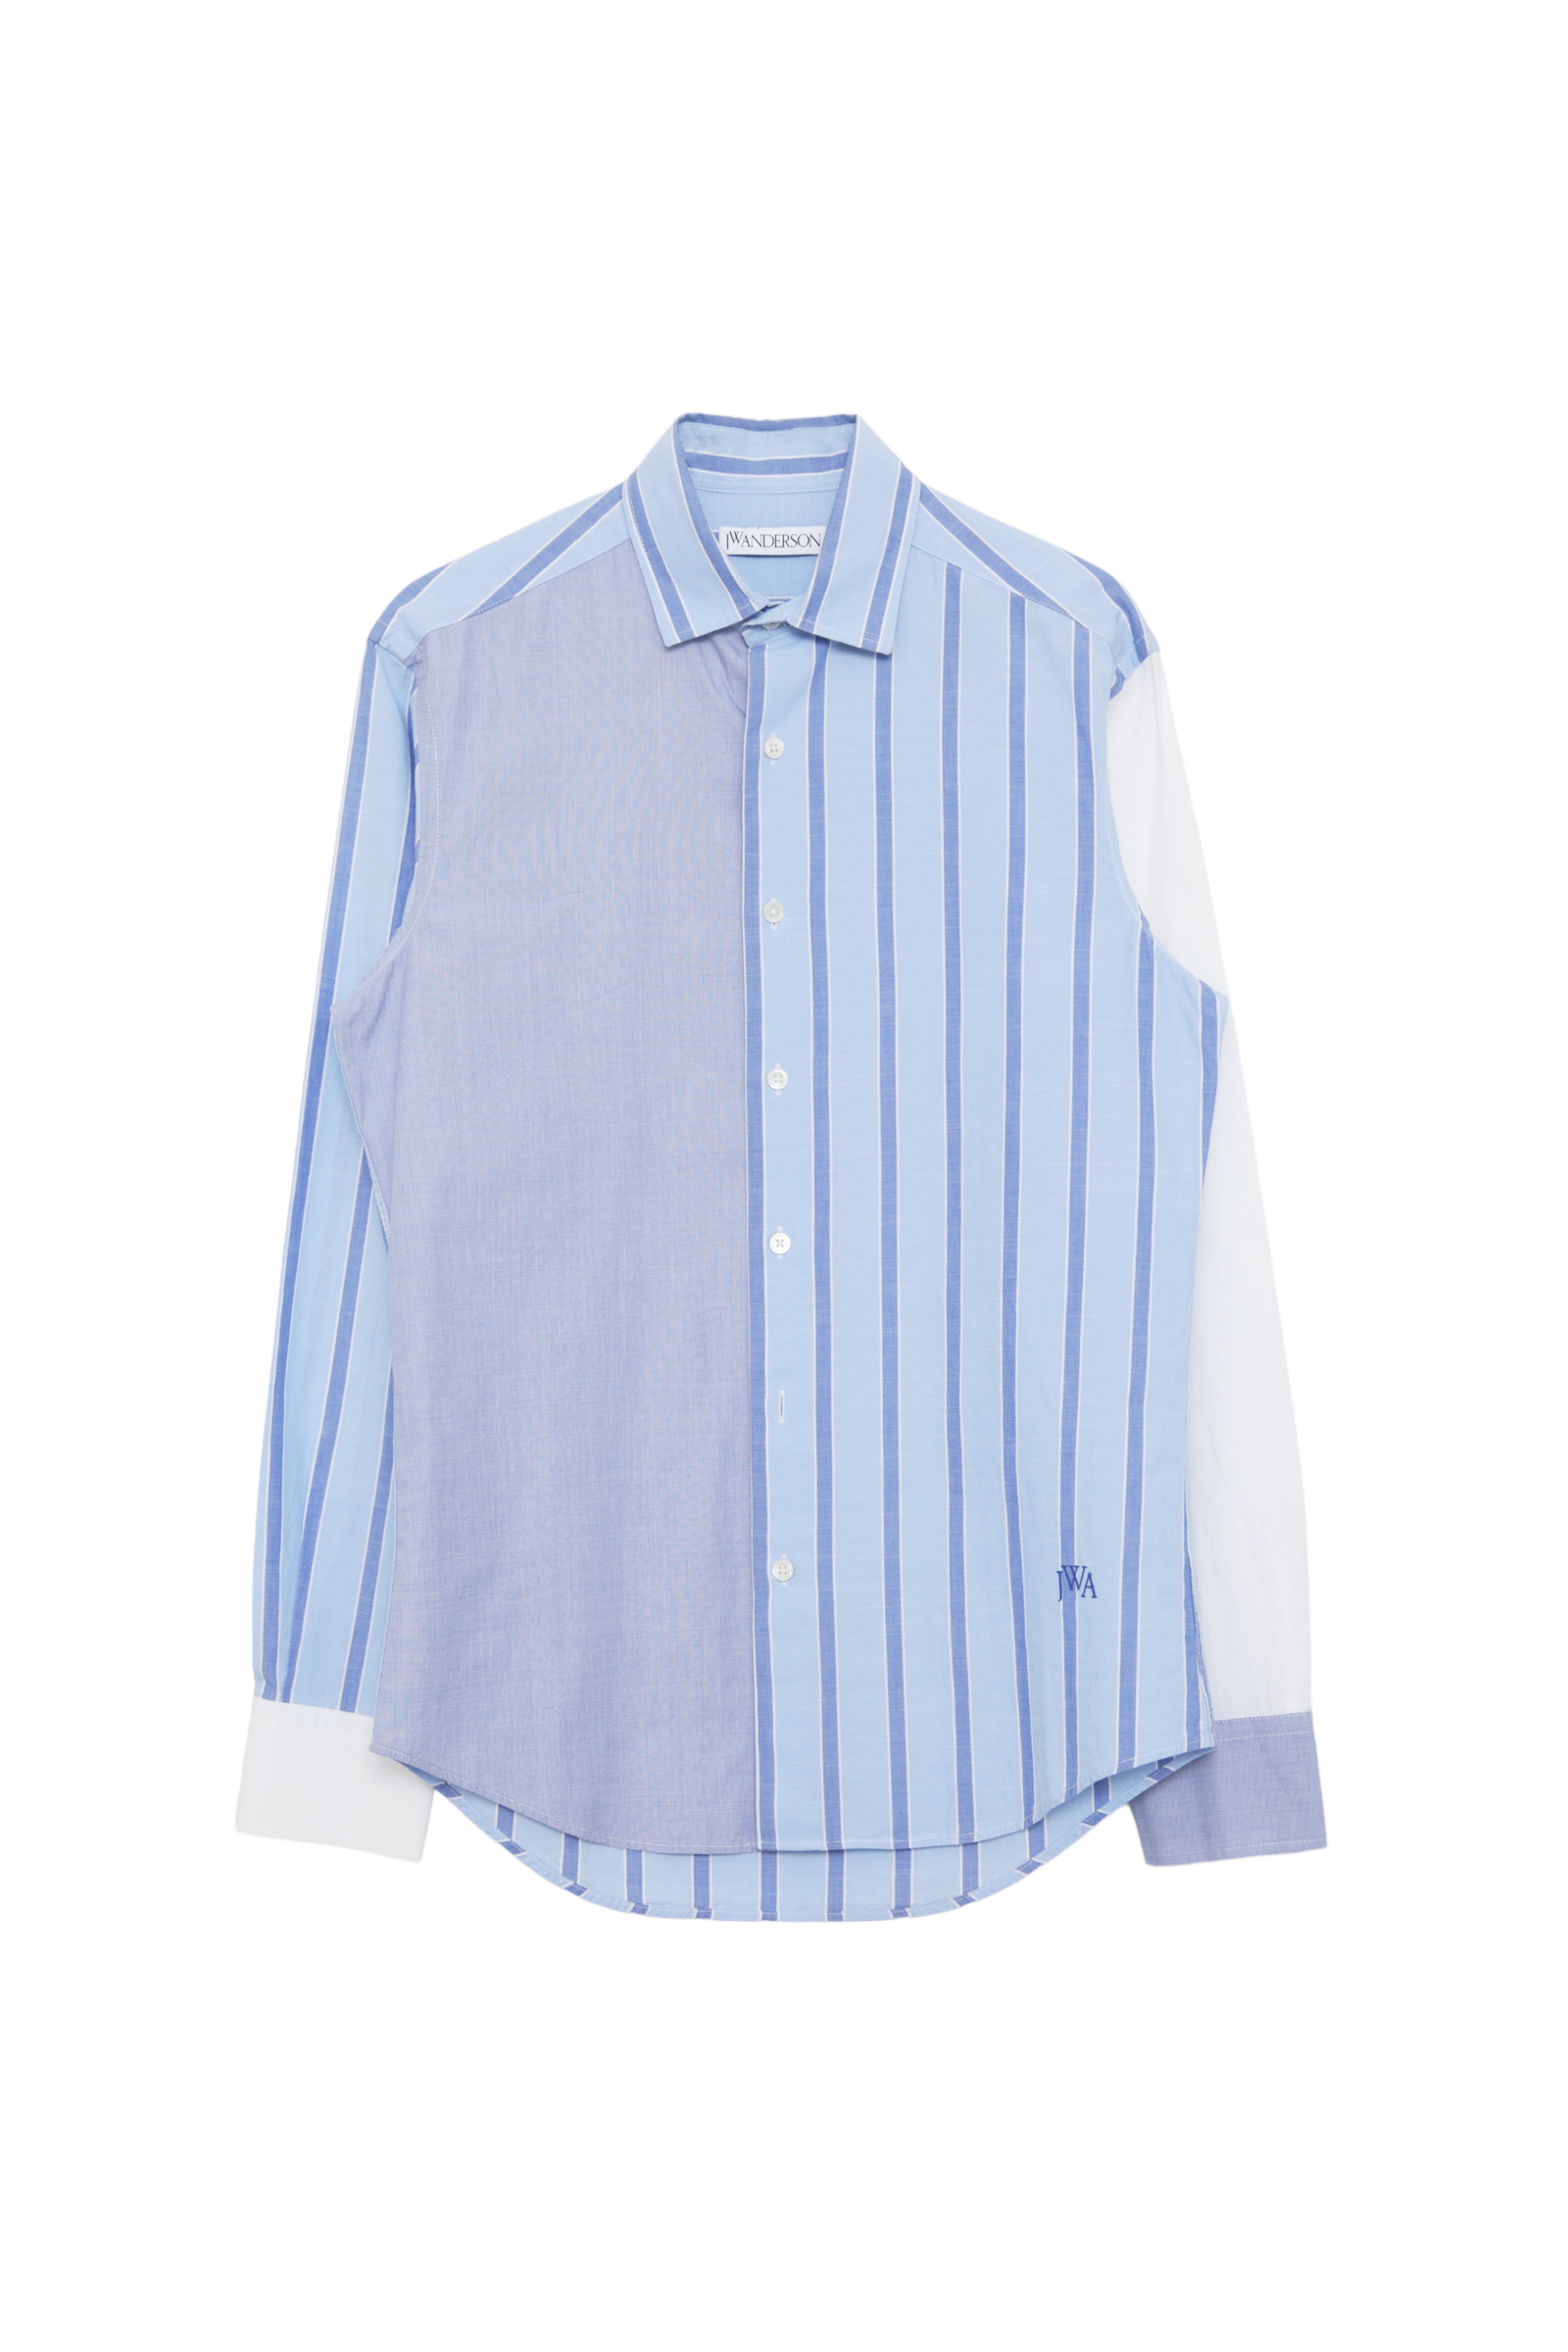 JW ANDERSON SWITCHING SHIRT